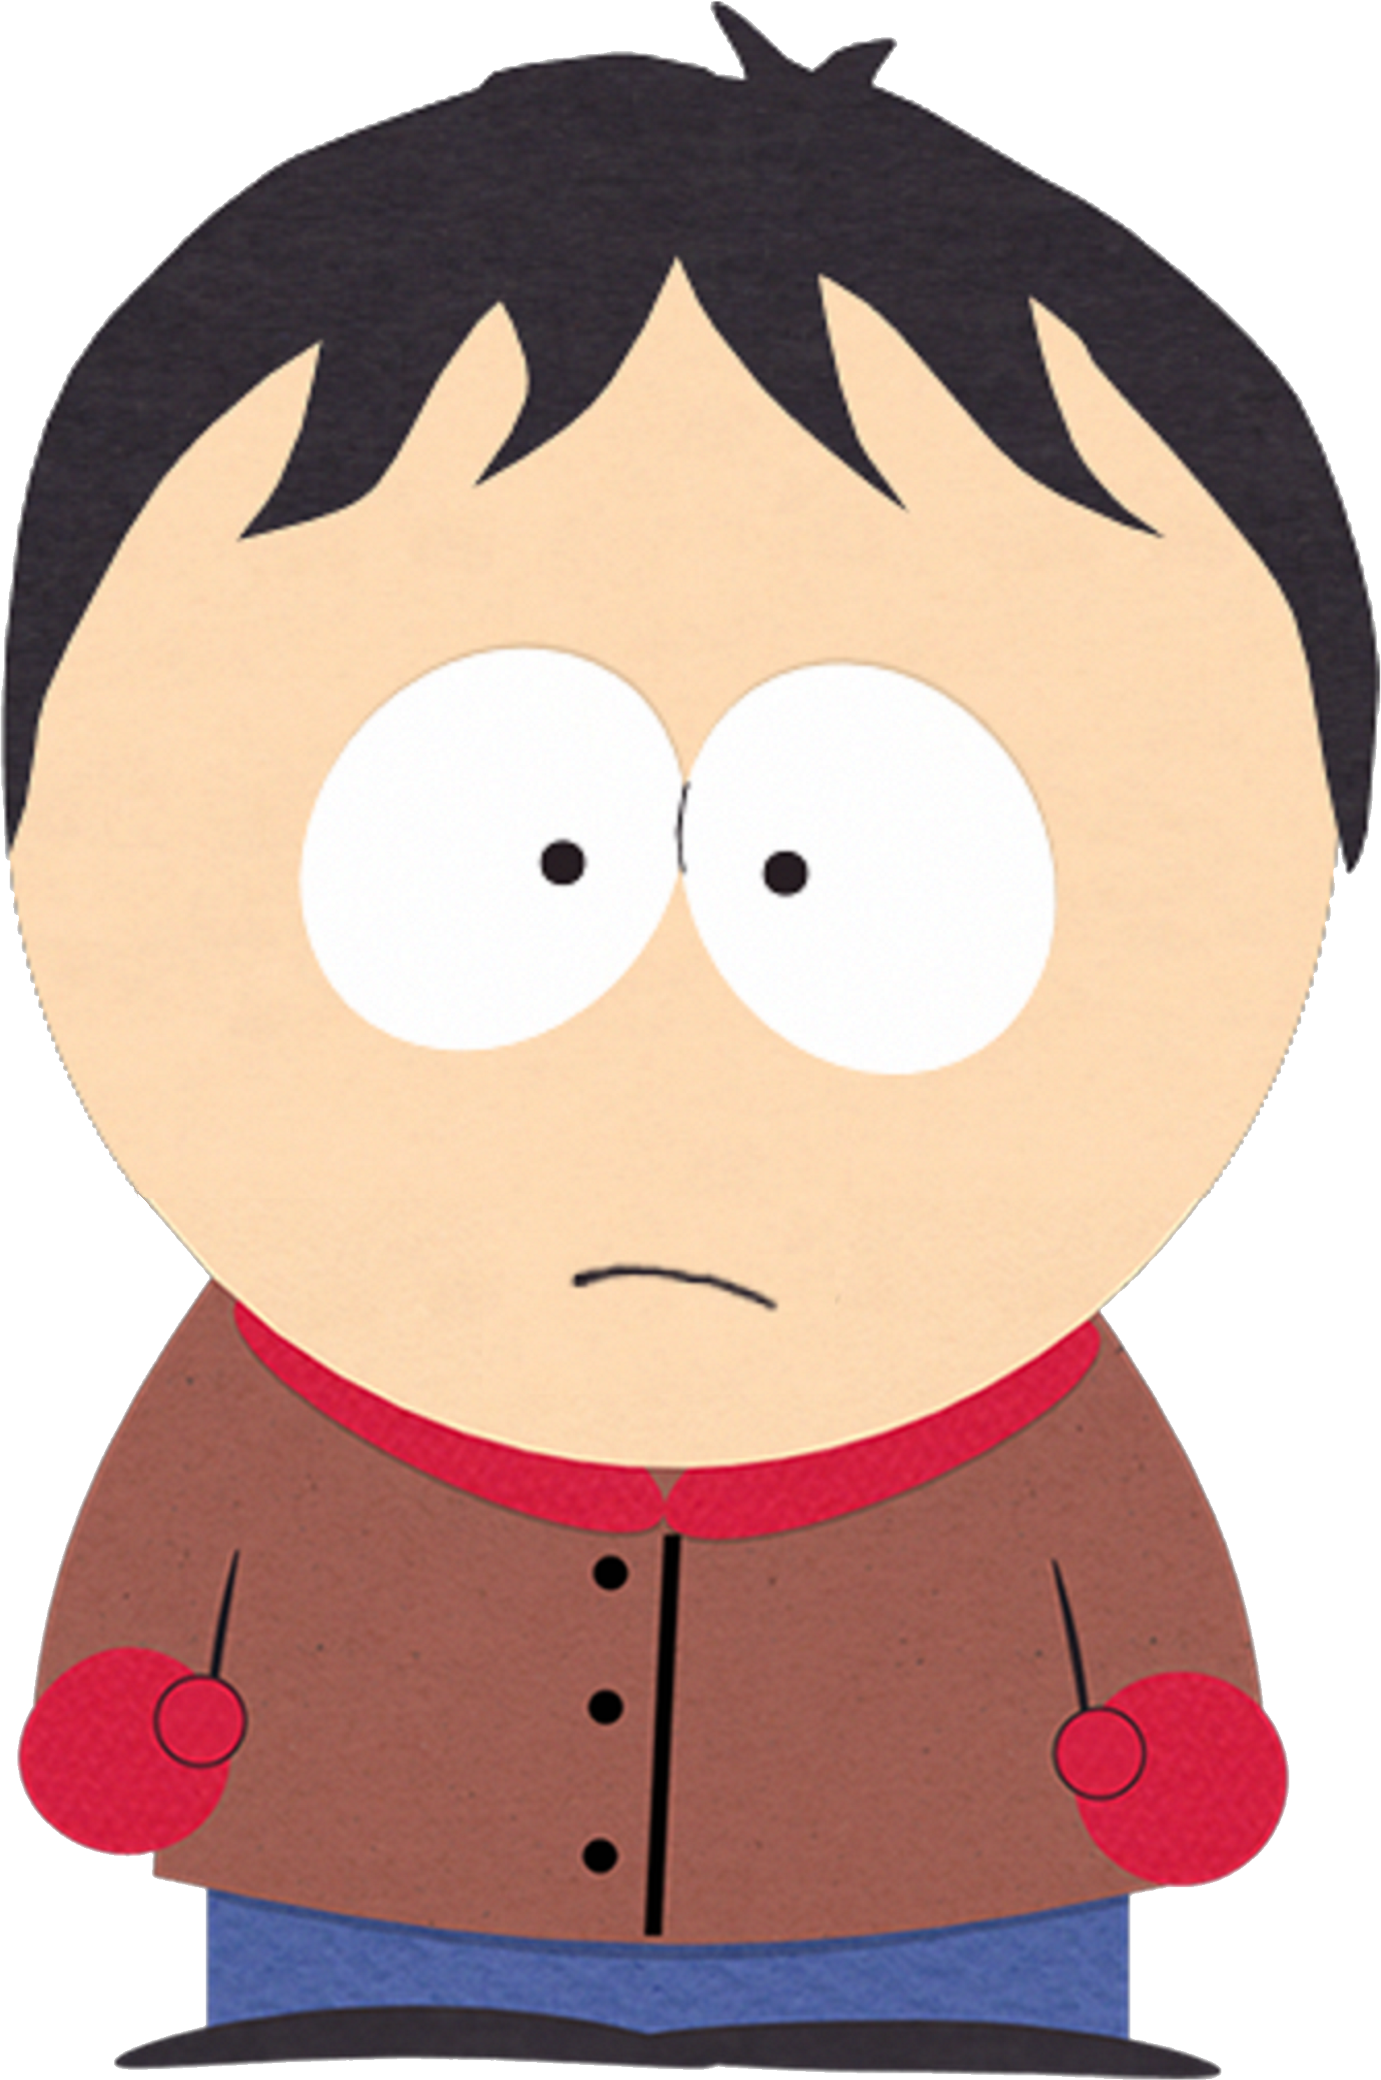 stan marsh without hat